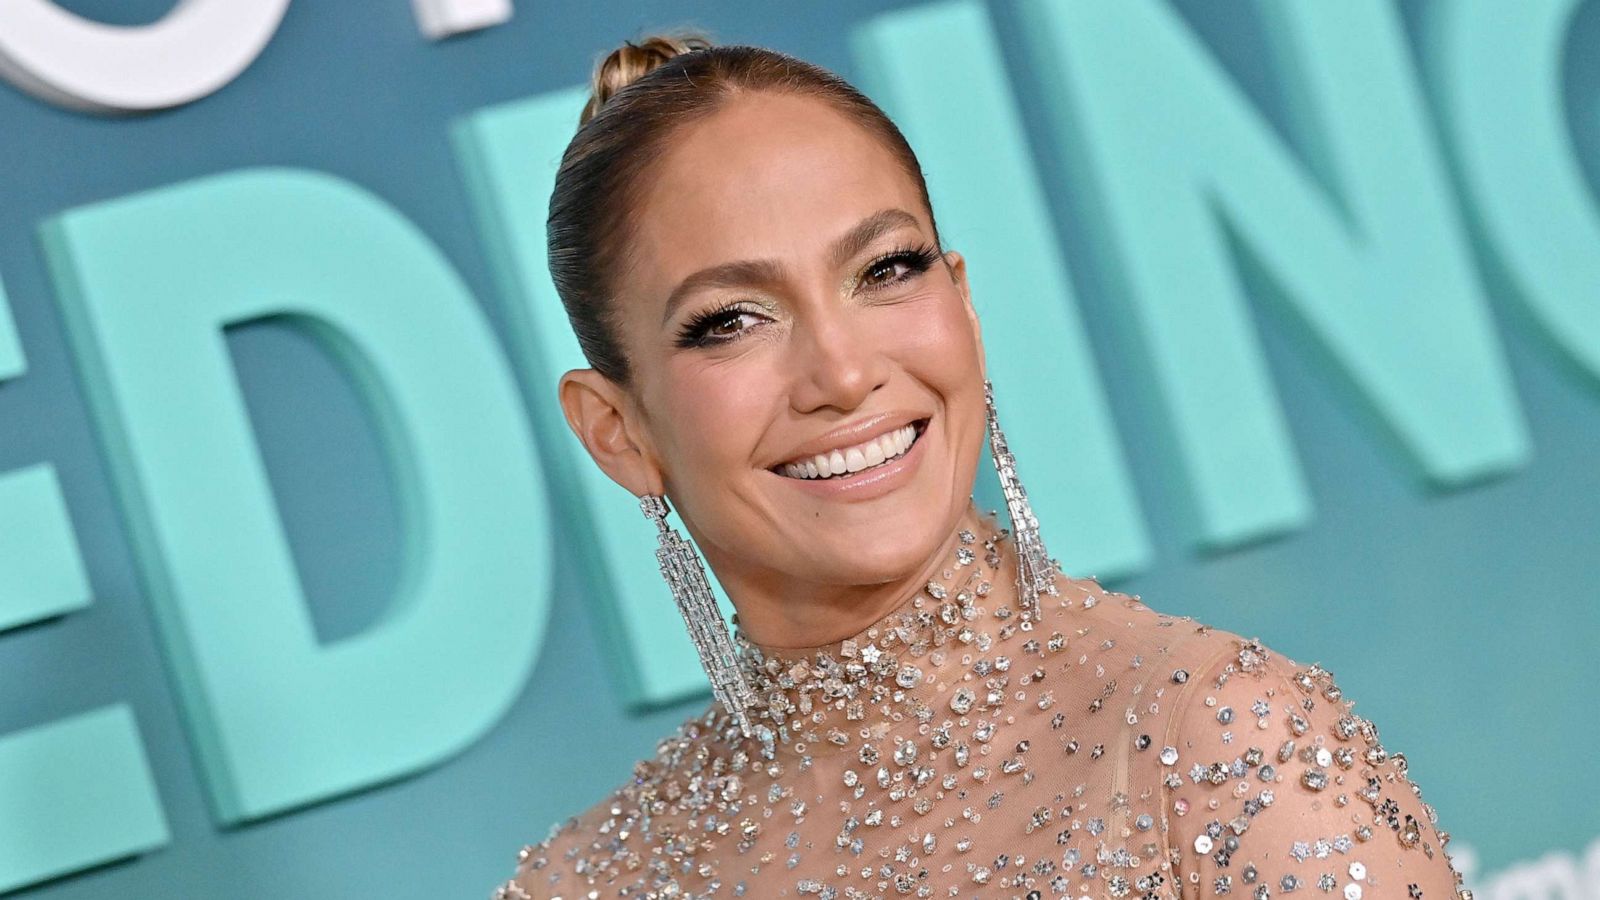 JLo looks stunning at her movie premiere